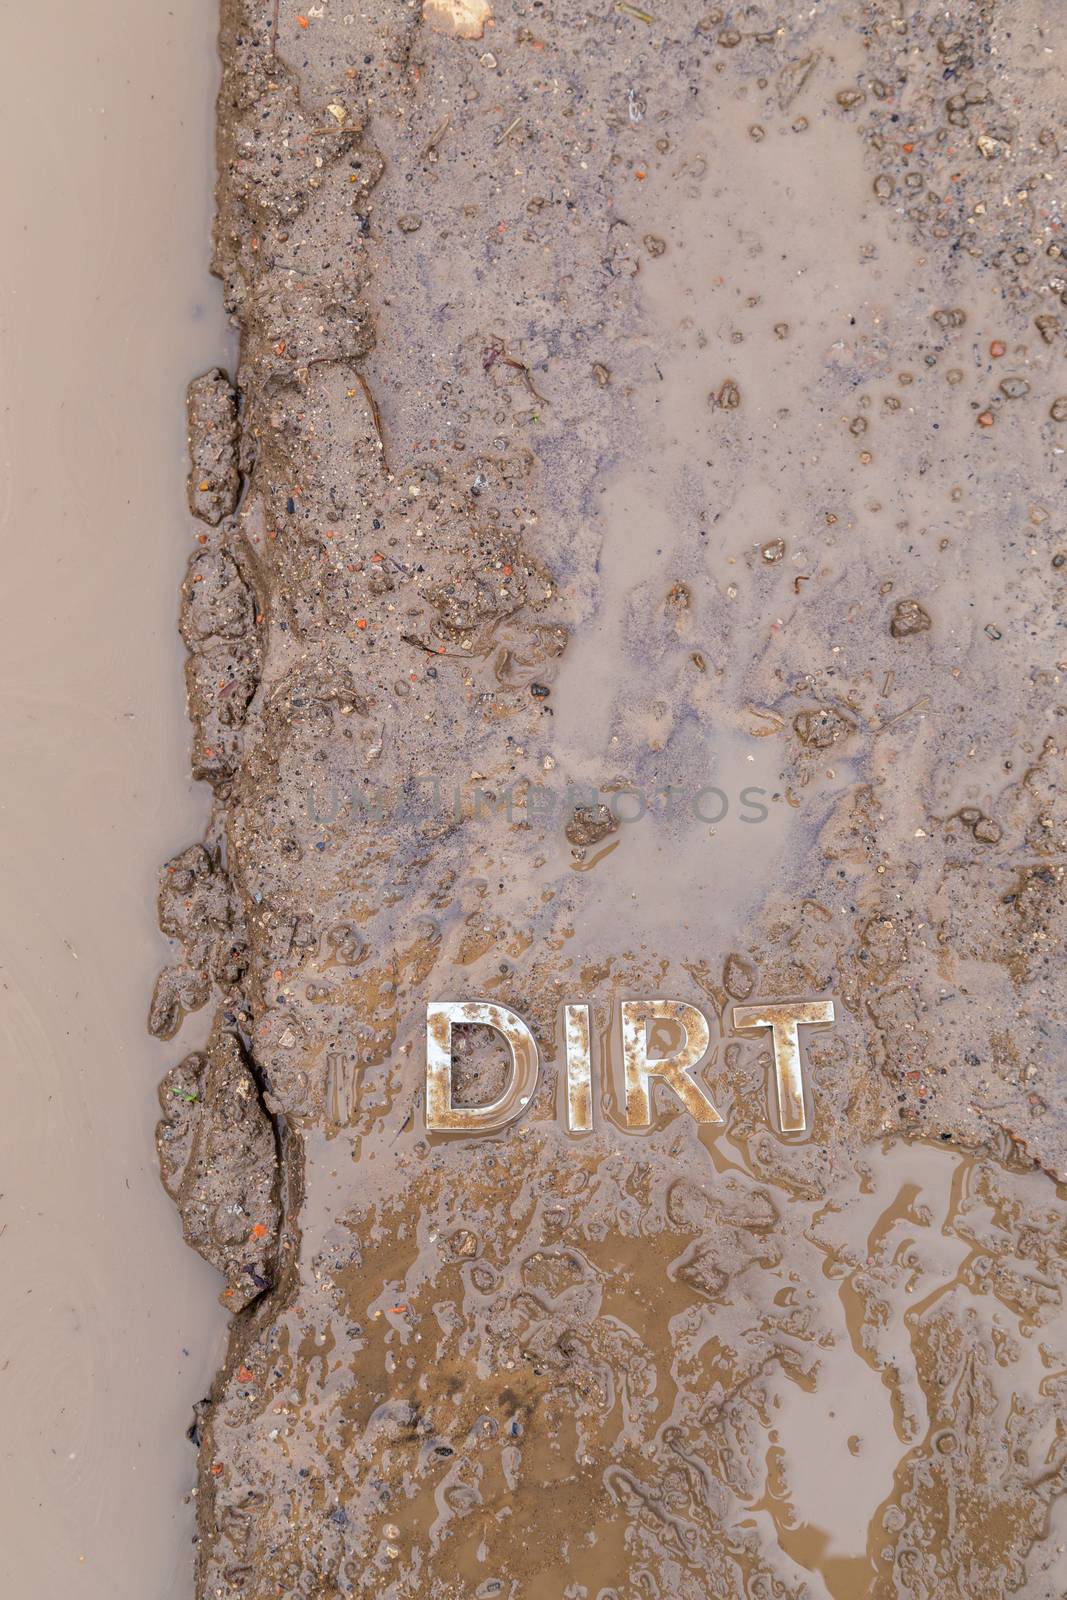 the word mud imprinted in wet dirt road surface and puddle - close-up with selective focus in flat lay perspective.